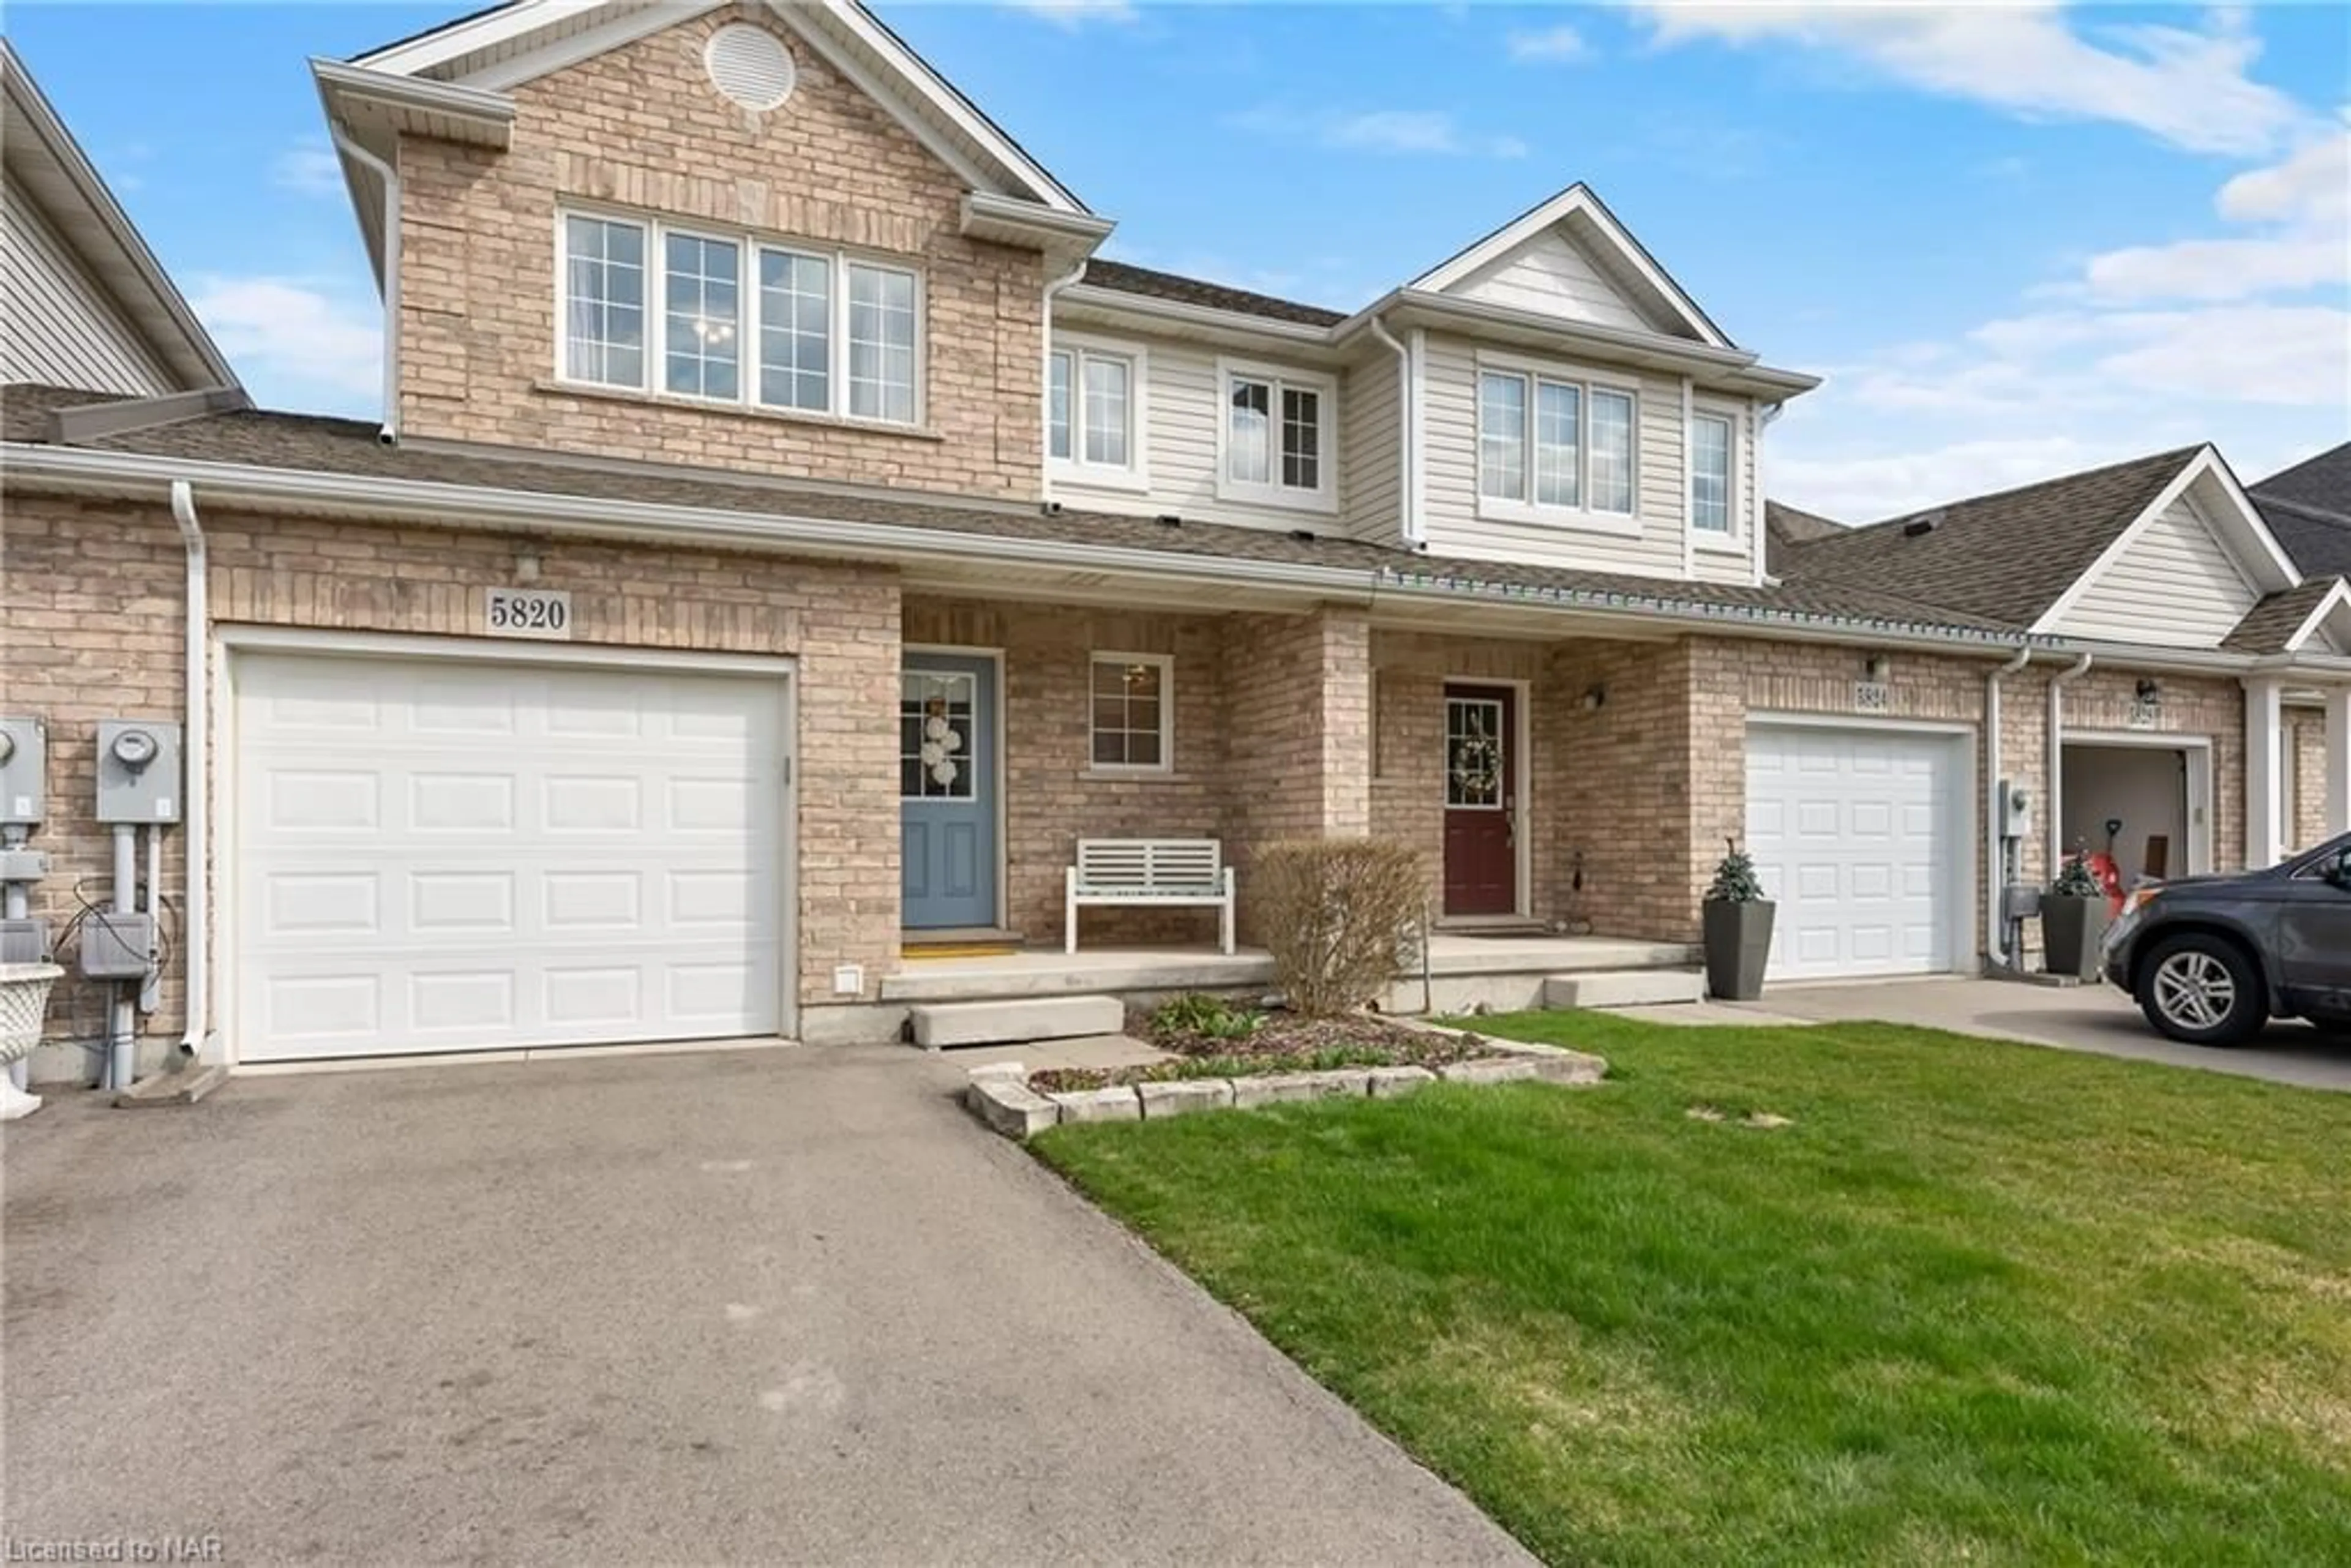 Frontside or backside of a home for 5820 Osprey Ave, Niagara Falls Ontario L2H 0G2